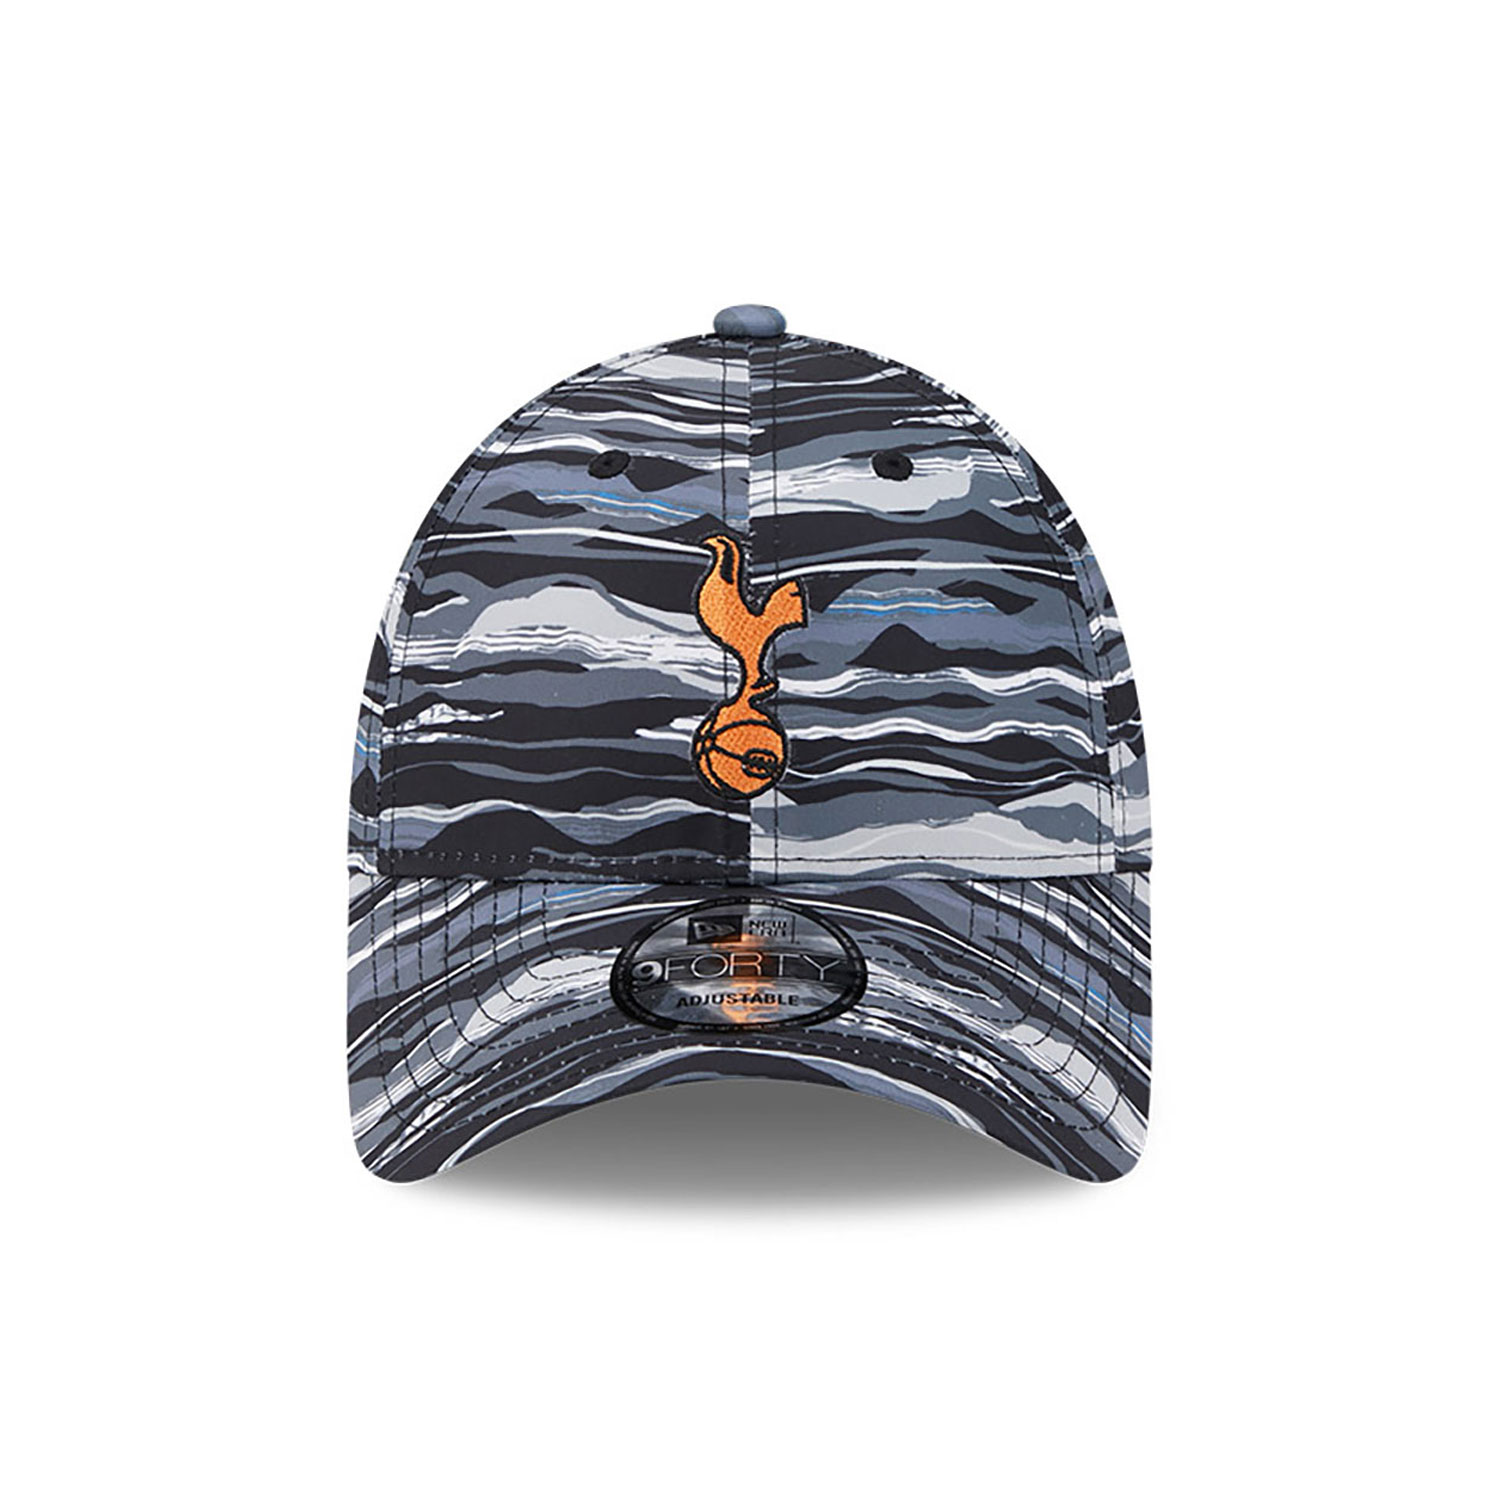 Tottenham Hotspur FC All Over Print Wave Multi Coloured  9FORTY Adjustable Cap